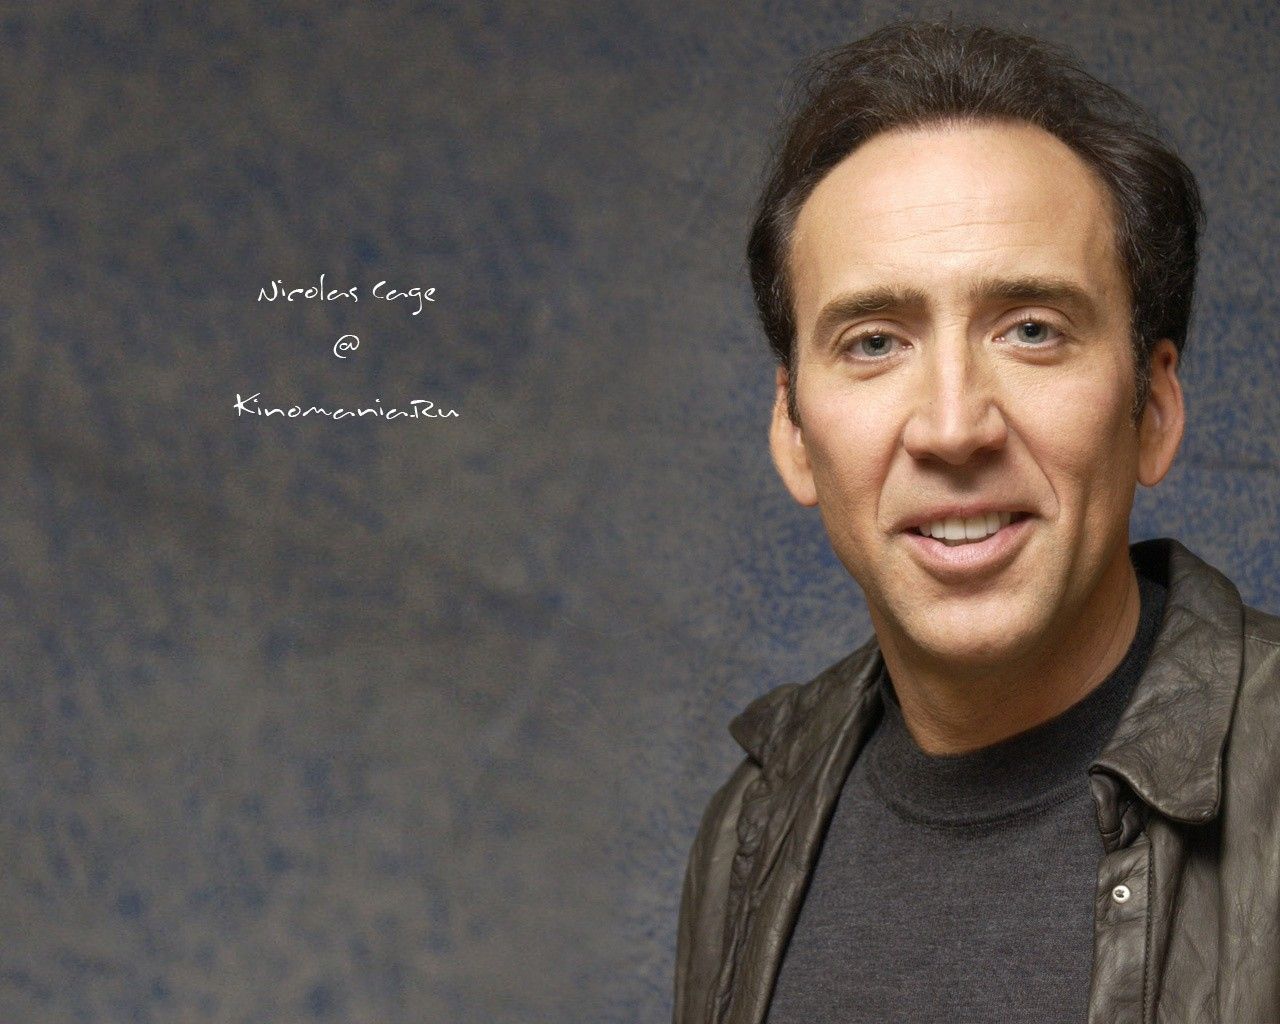 Actor Nicolas Cage wallpapers and images - wallpapers, pictures ...